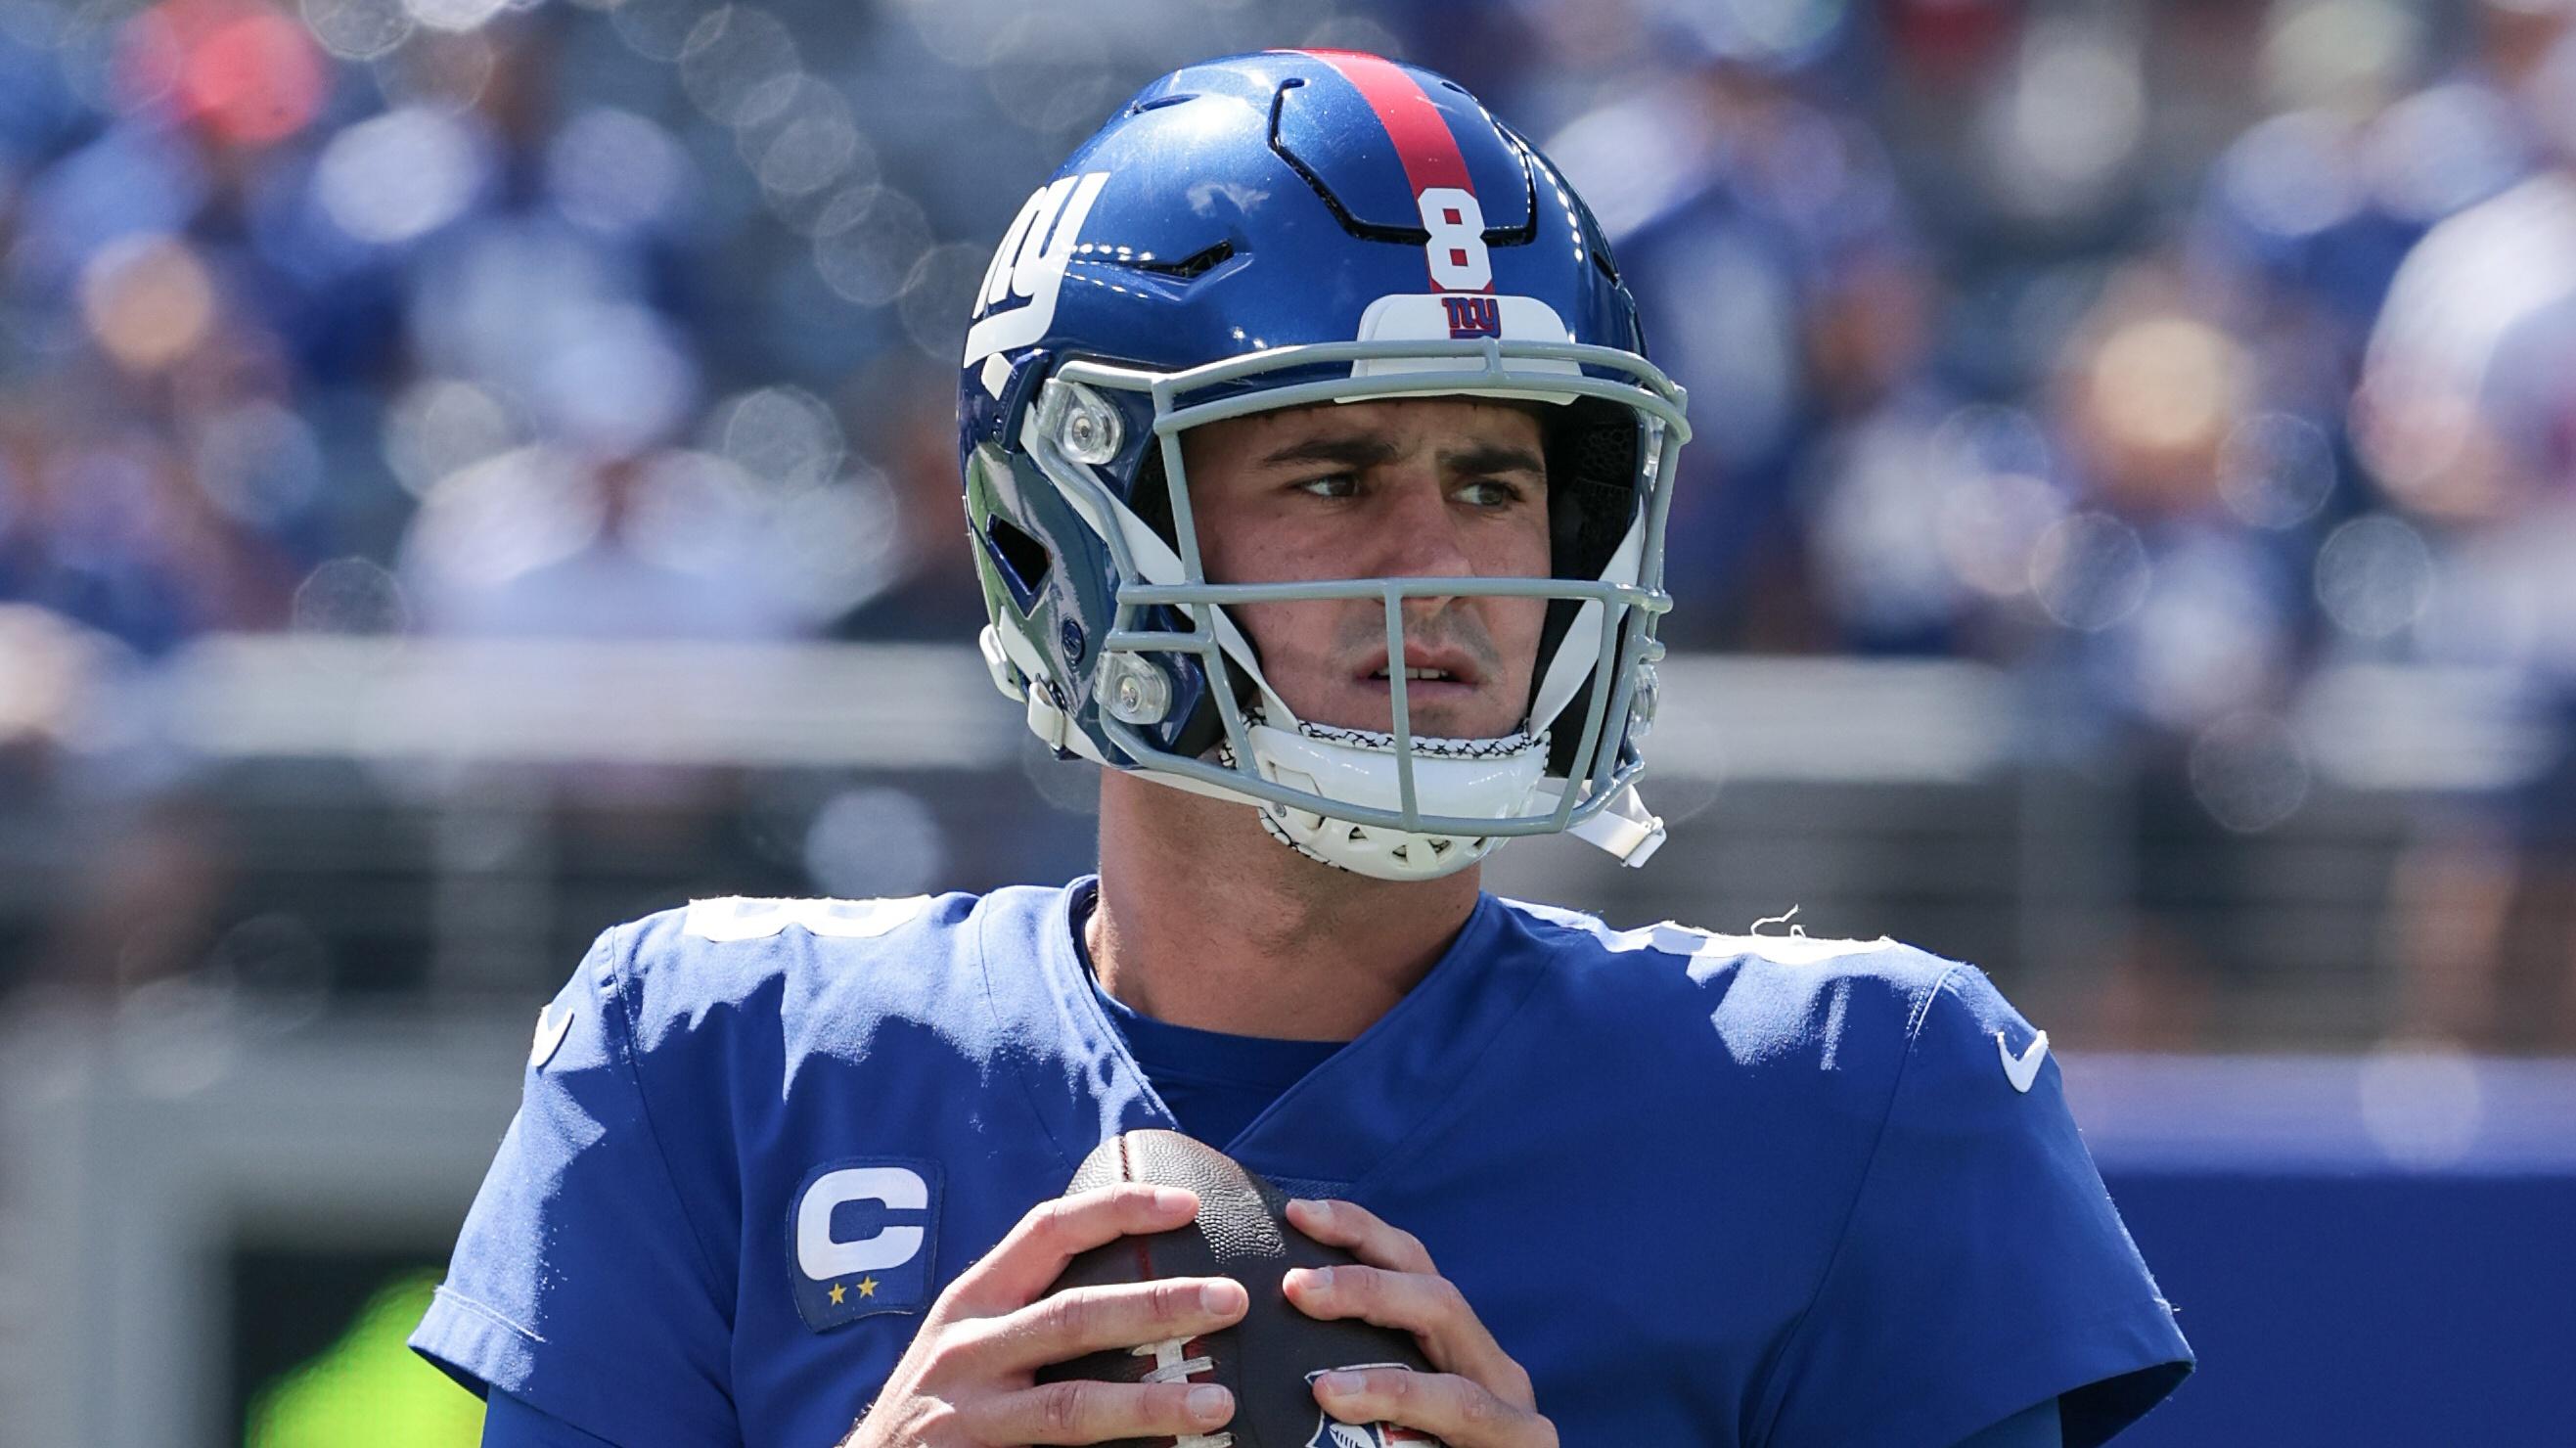 Sep 26, 2021; East Rutherford, New Jersey, USA; New York Giants quarterback Daniel Jones (8) warms up before the game against the Atlanta Falcons at MetLife Stadium. Mandatory Credit: Vincent Carchietta-USA TODAY Sports / © Vincent Carchietta-USA TODAY Sports